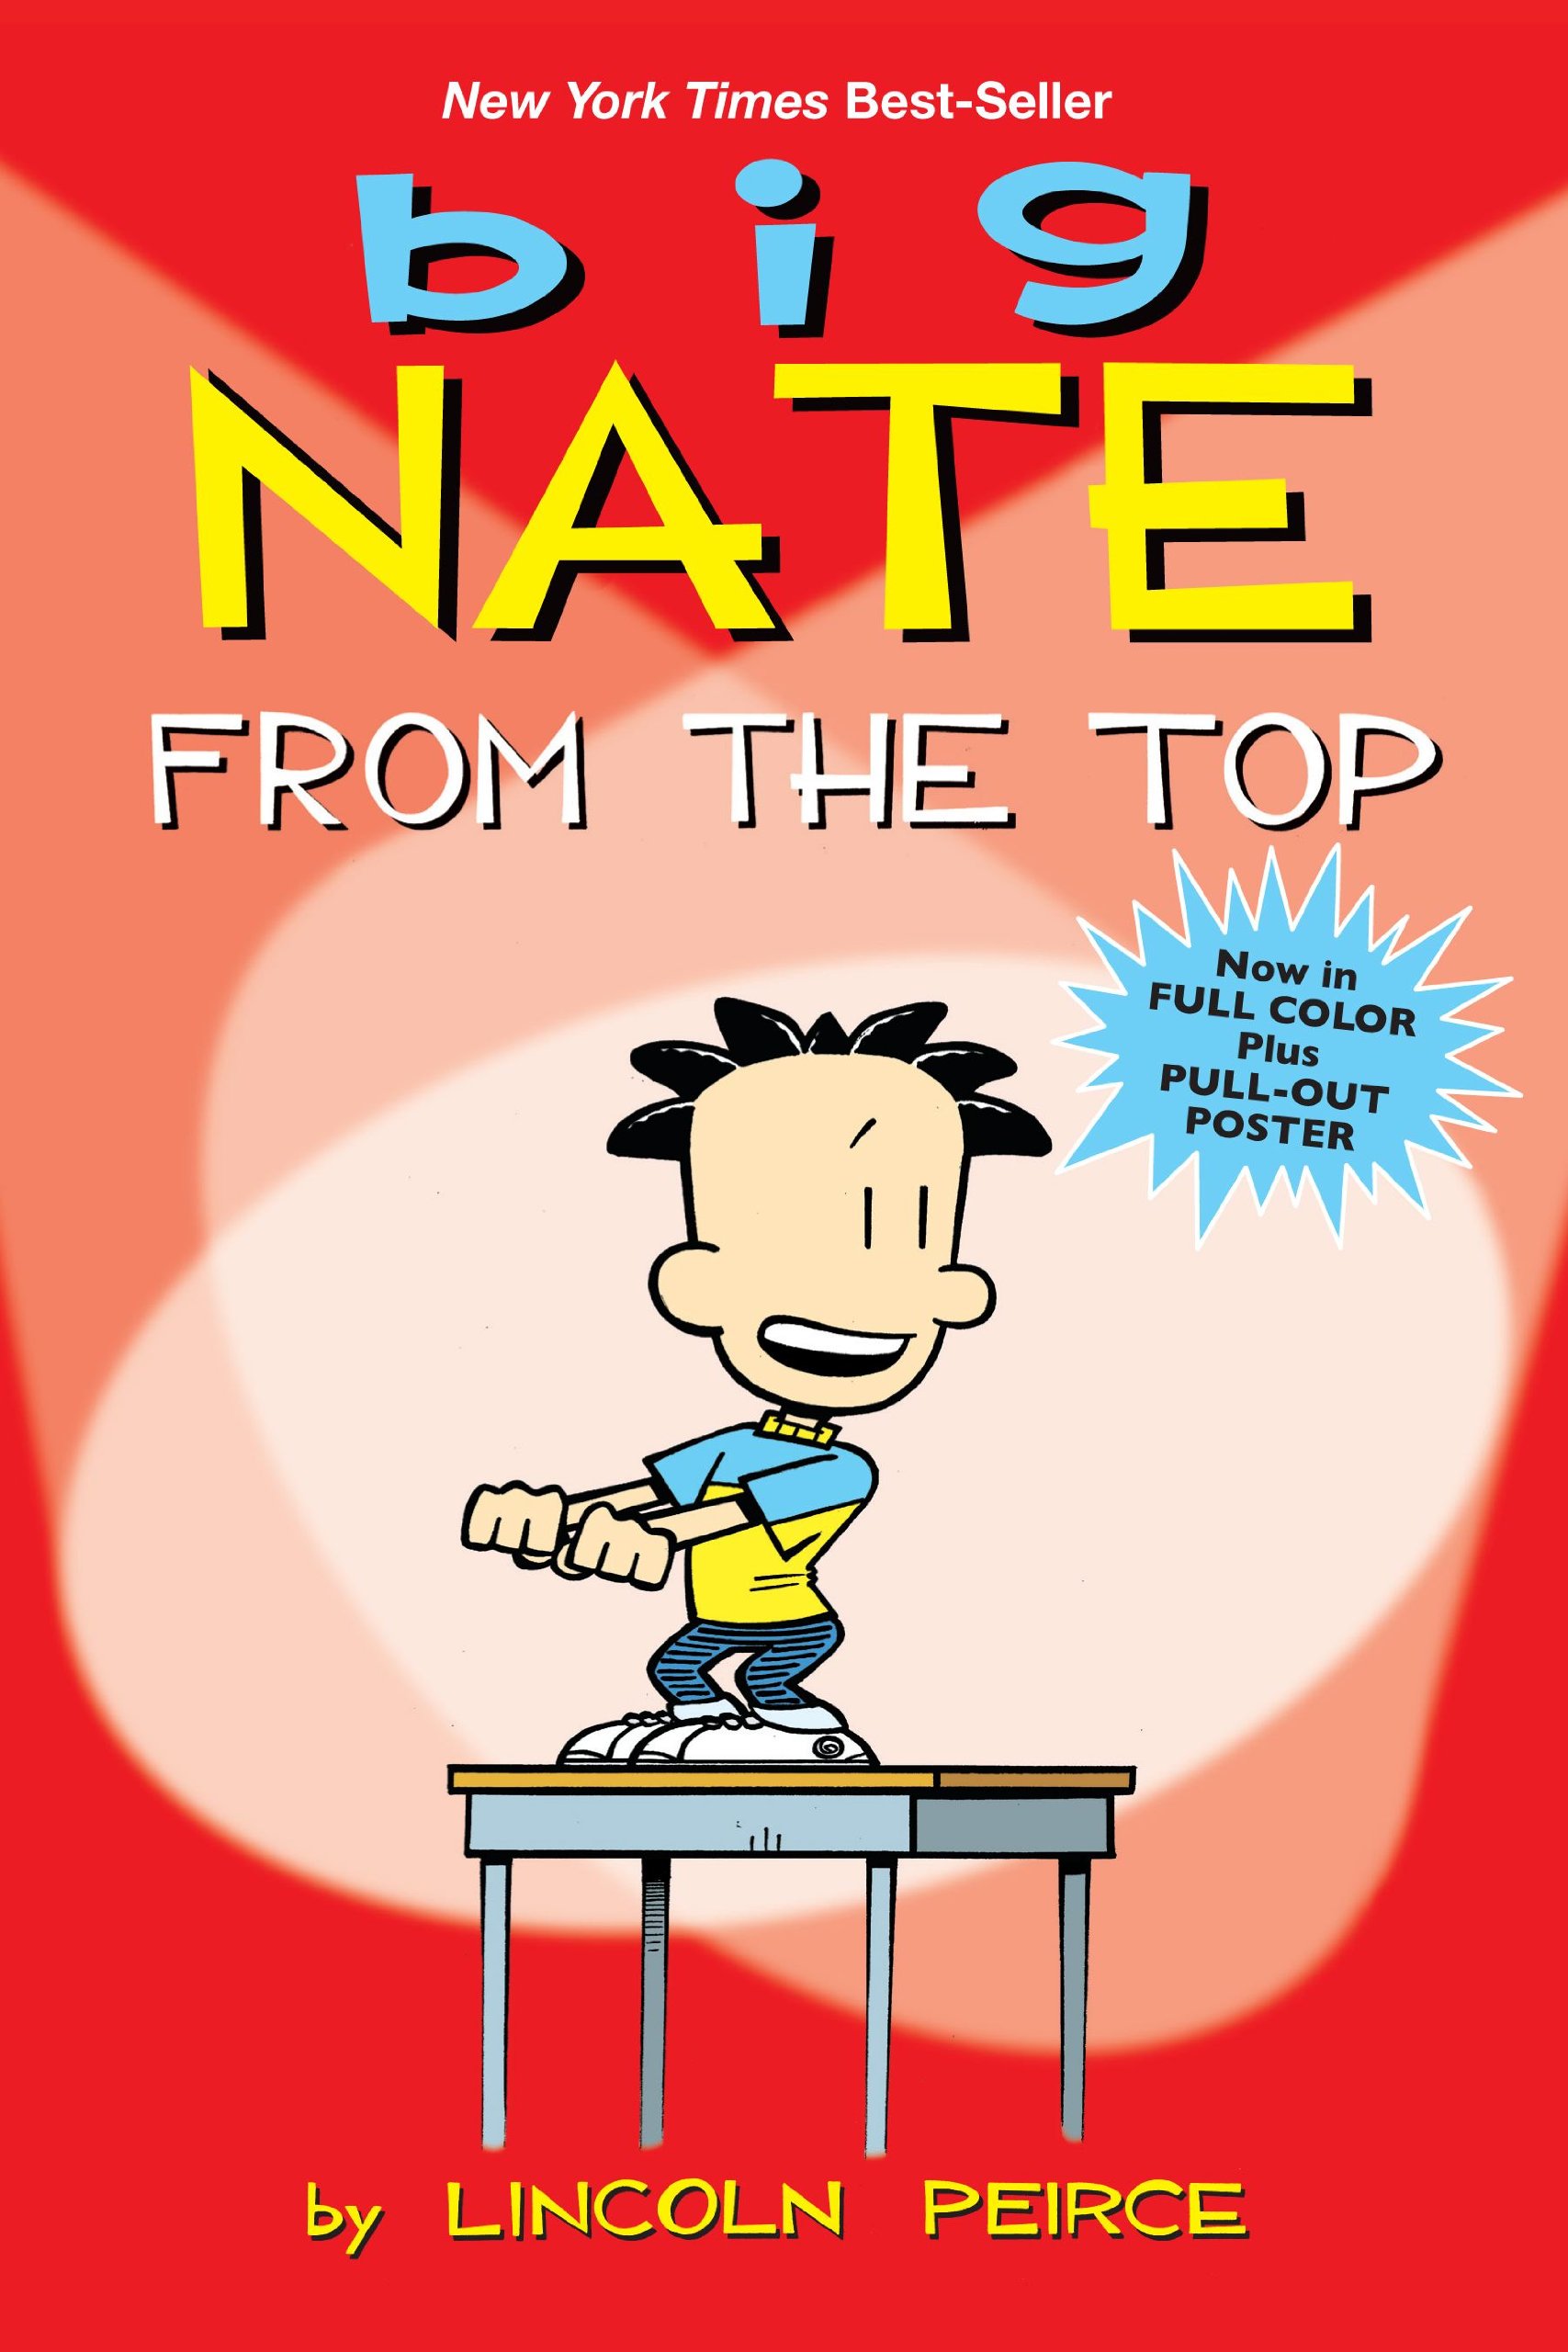 55  All Big Nate Comic Books In Order for Learn